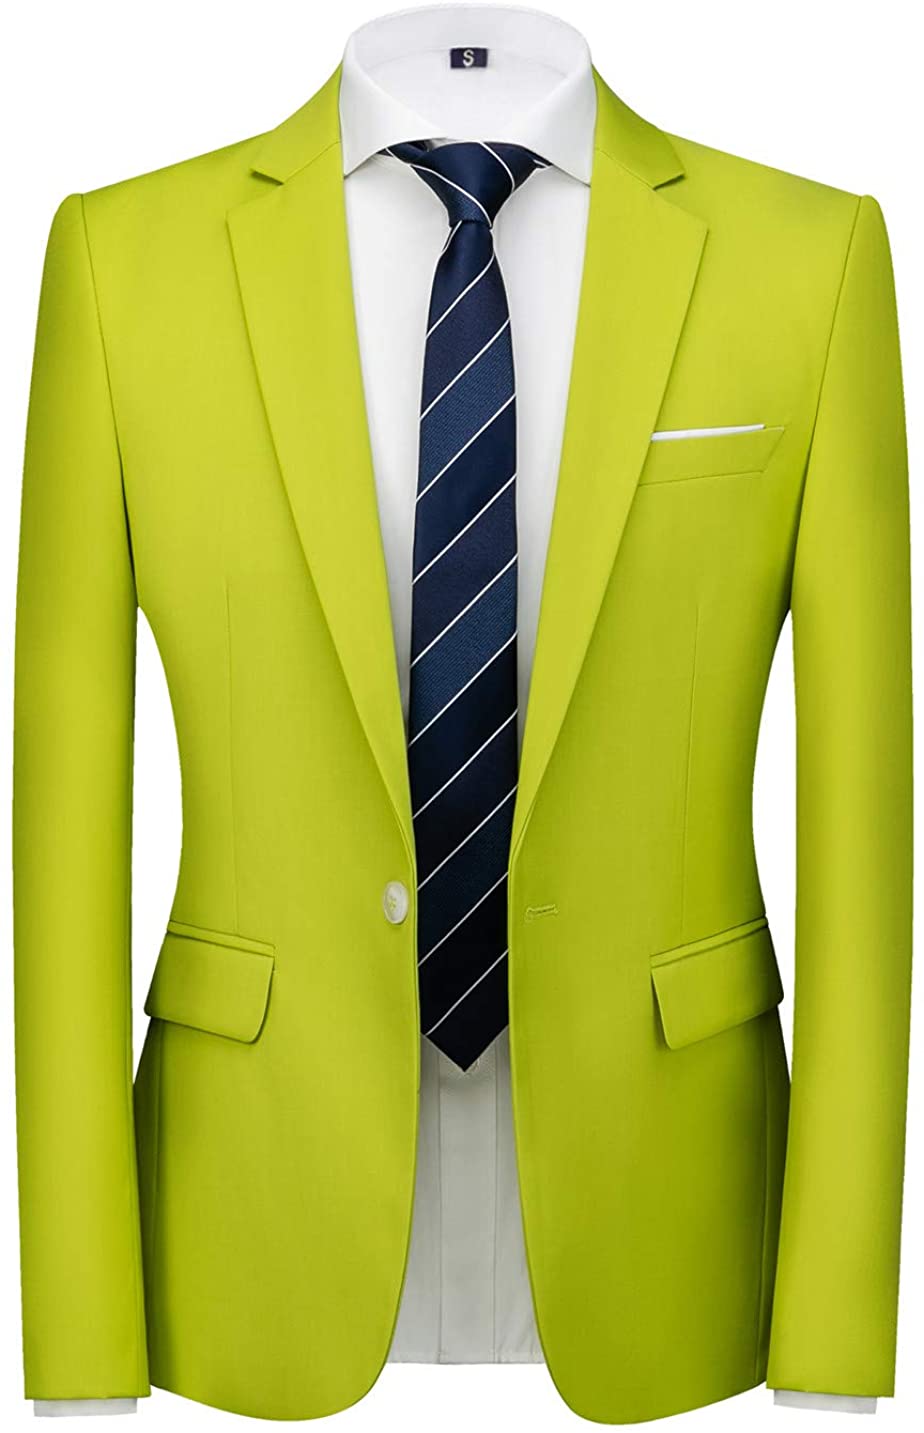 Mens Blazer Slim Fit Sport Coats 23 Colors for Daily Business and Party